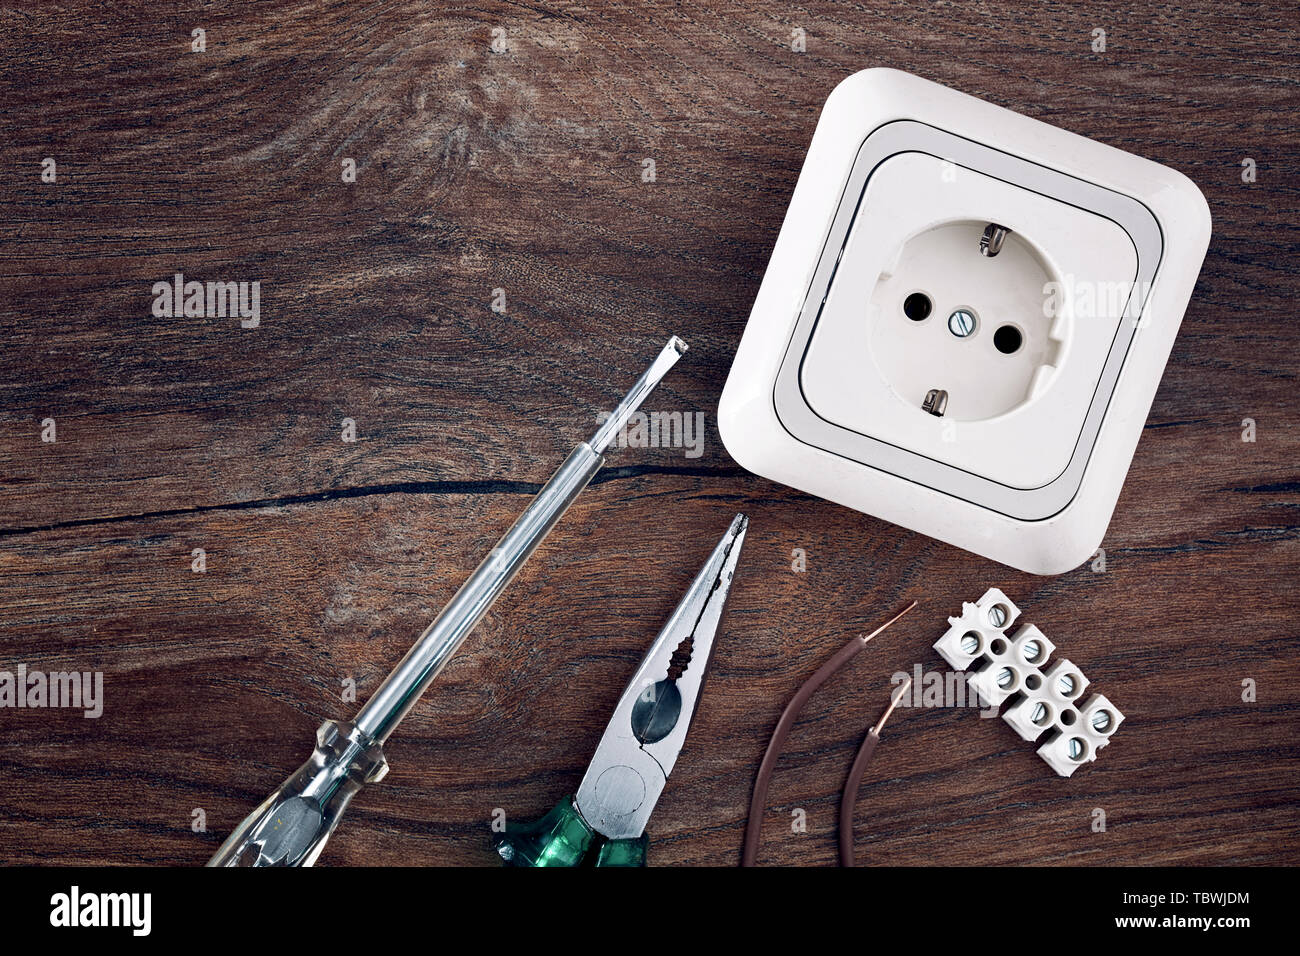 Set of electrical work tools on wooden table background with copy space. Top down close up view. Stock Photo